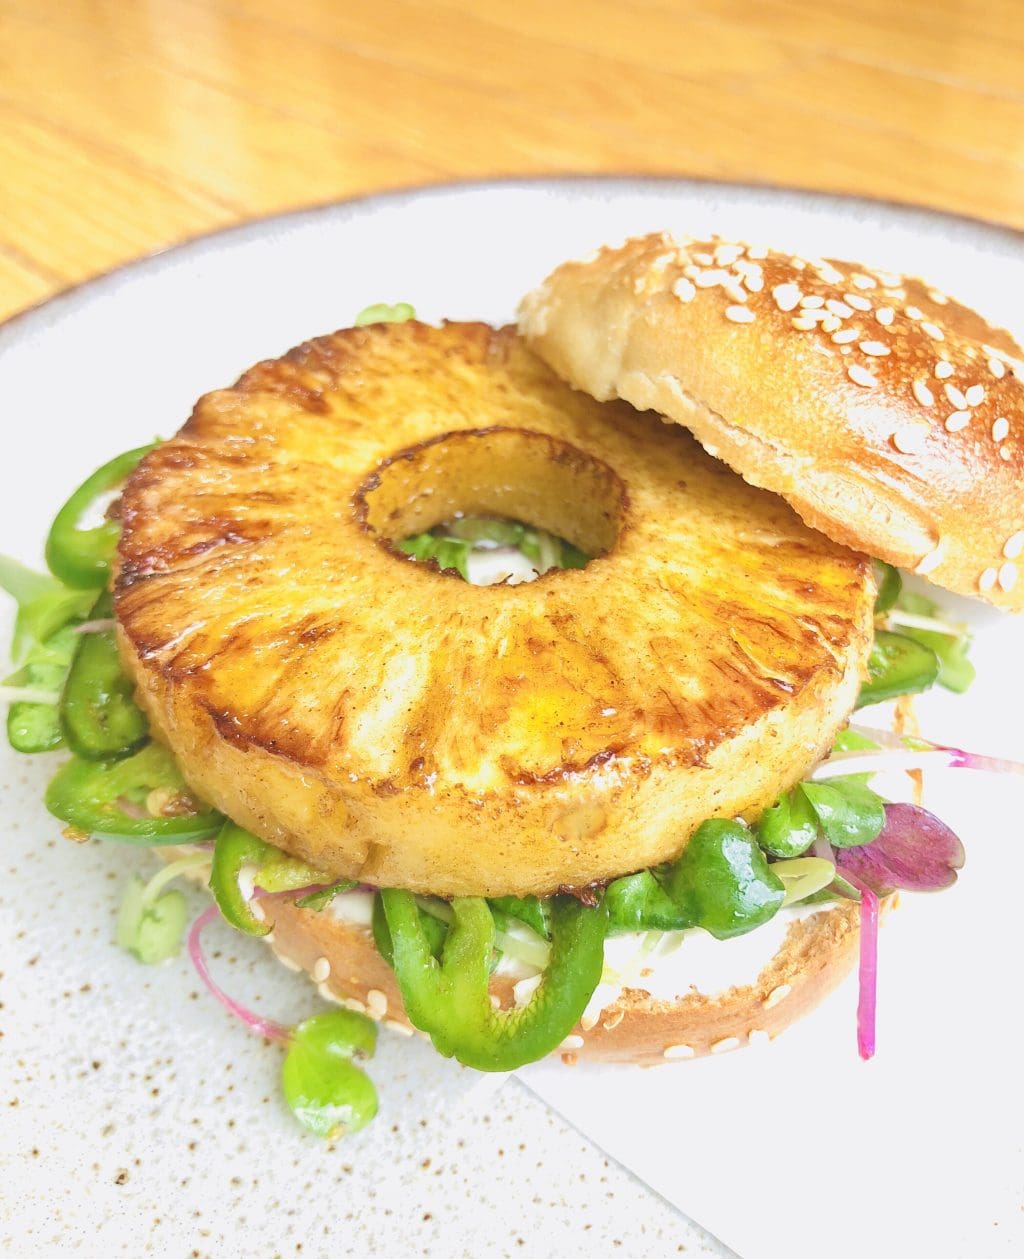 Pineapple and Jalapeno Bagel Sandwich